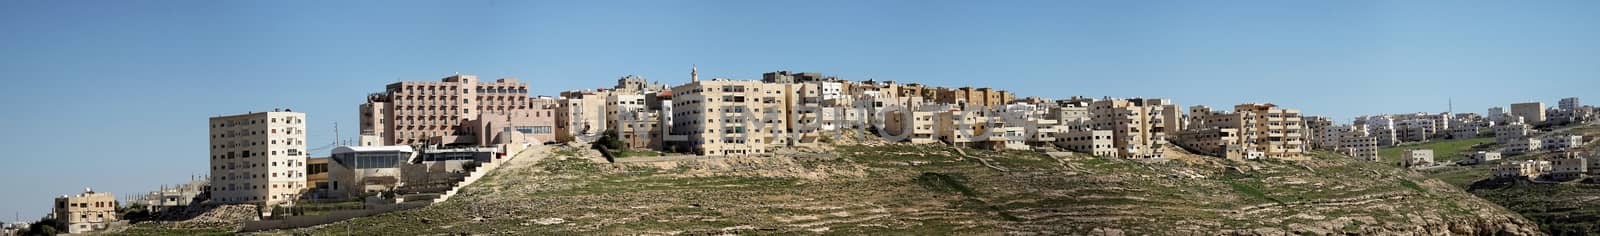 Composite high-resolution panorama of the high-rise housing estate on the outskirts of the city of Karak in Jordan., middle east